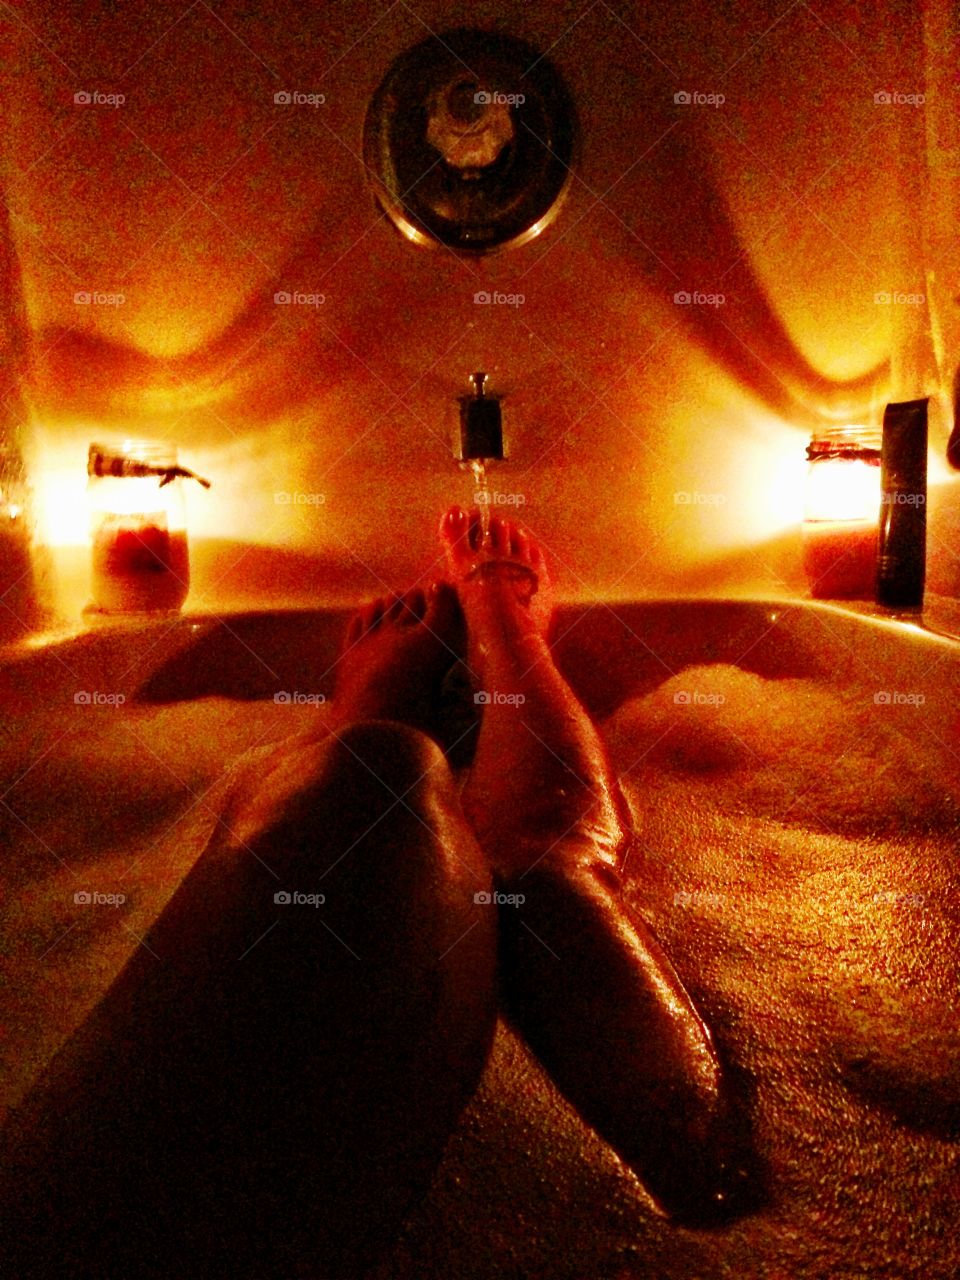 #relax #water #candlelight #bubbles